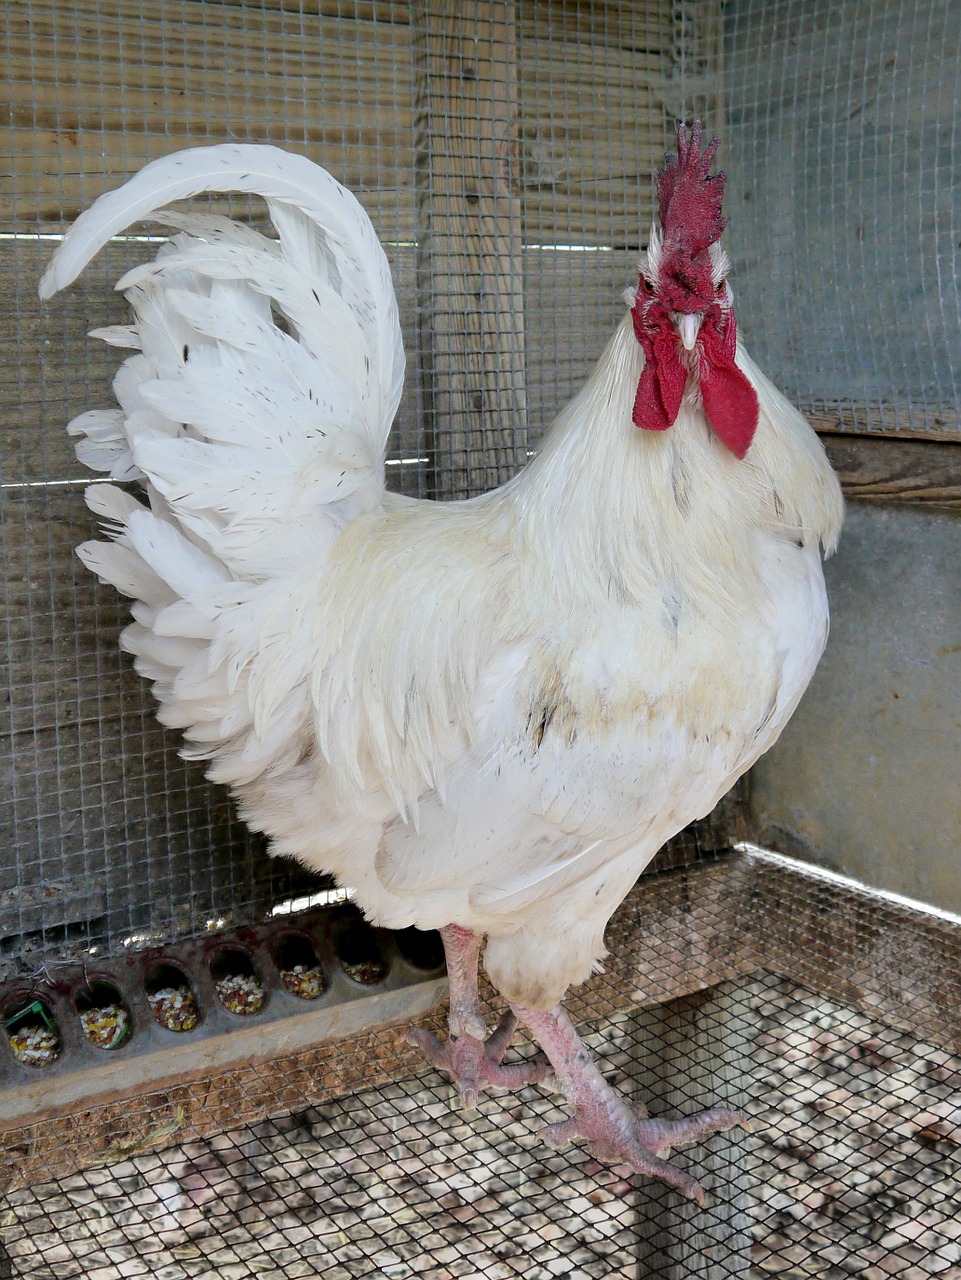 Why Keeping Roosters Can Be A Bad Idea